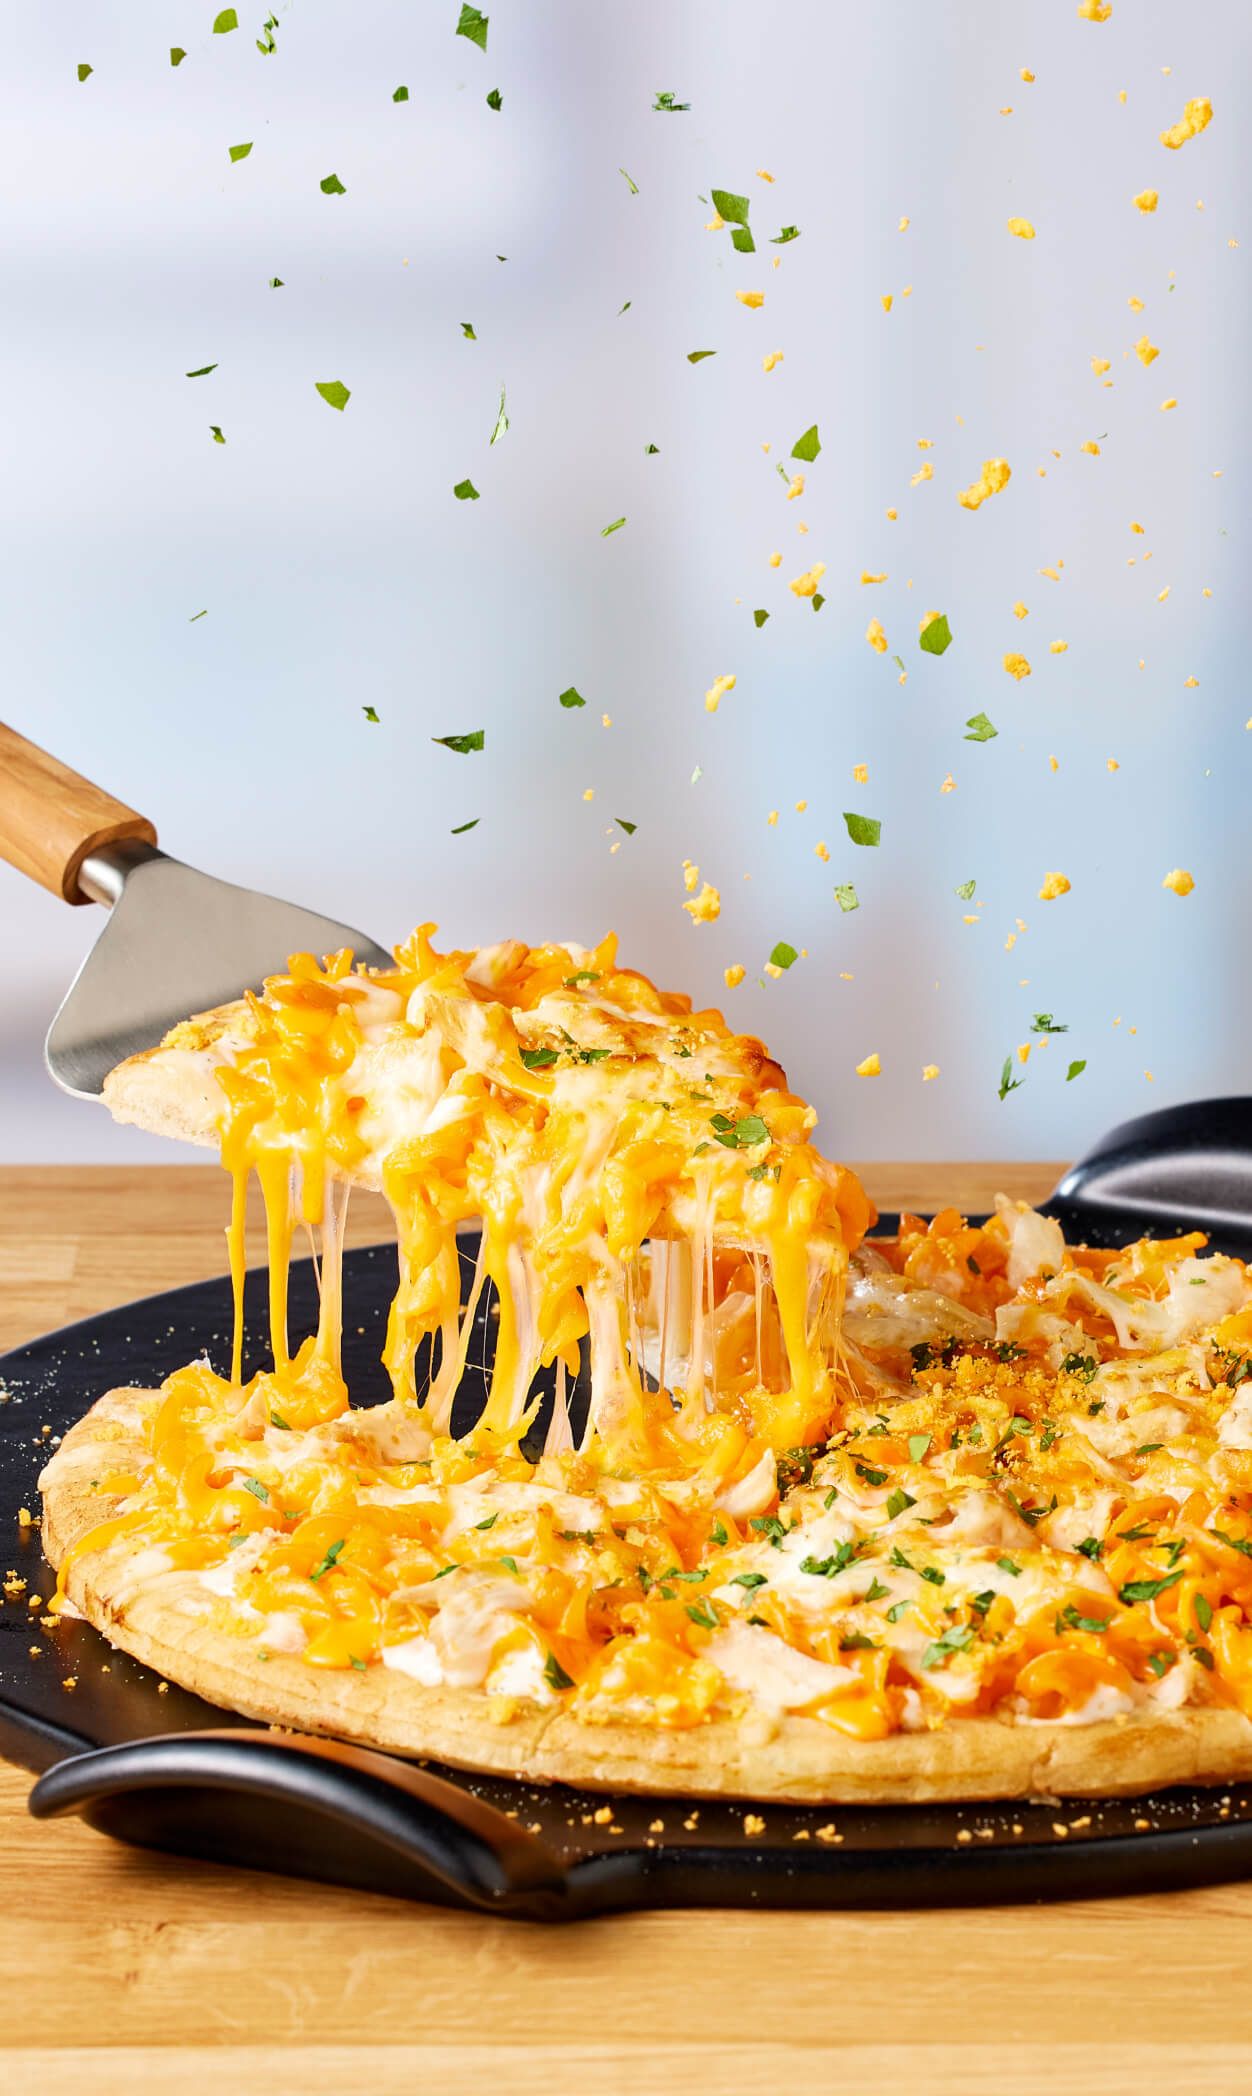 Slice of Cheetos Mac n’ Cheese Pizza with toppings.